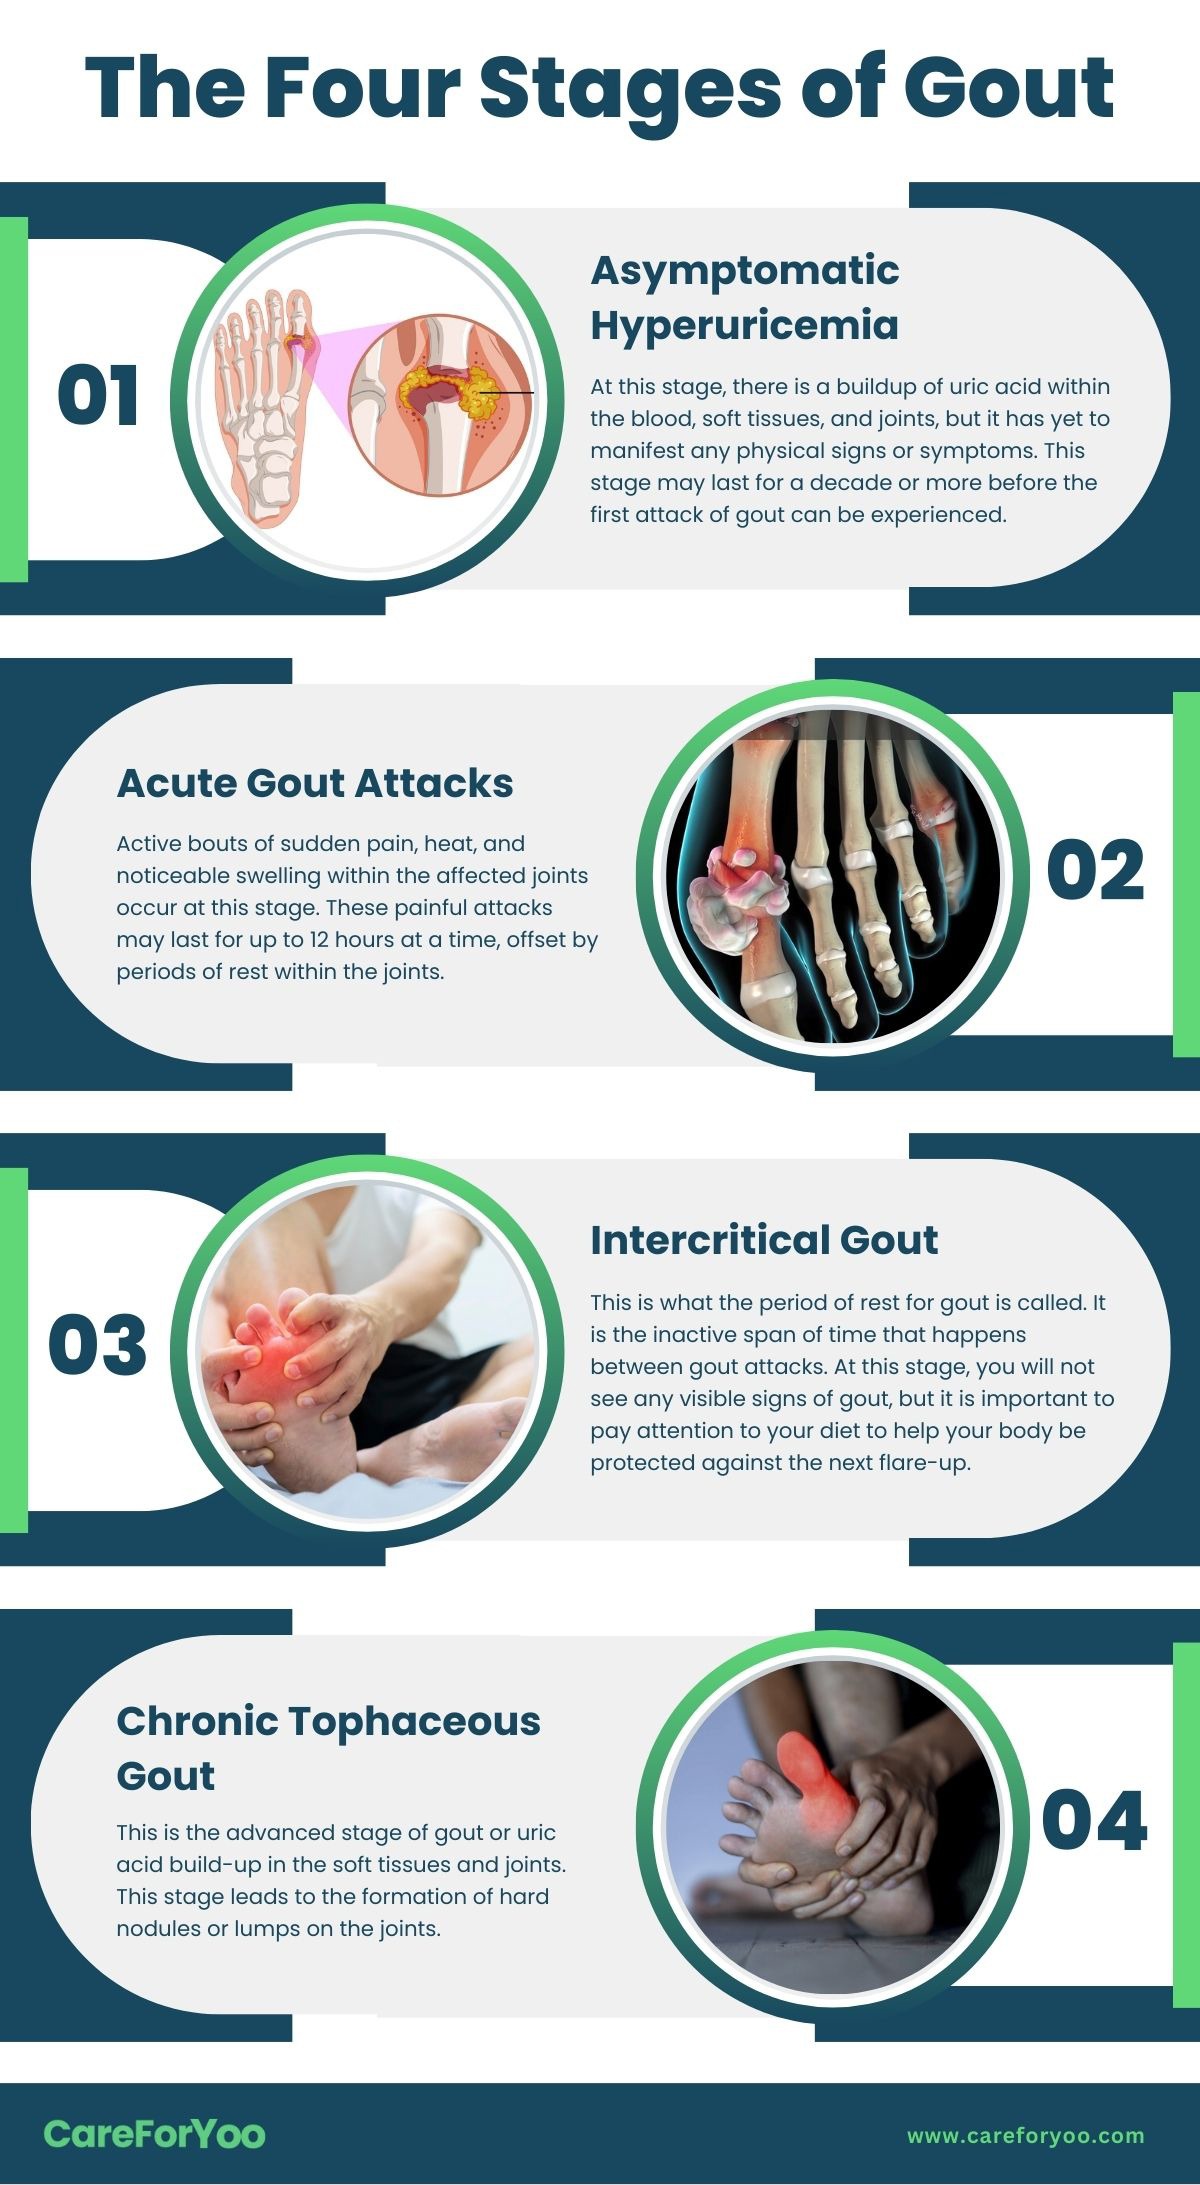 The Four Stages of Gout